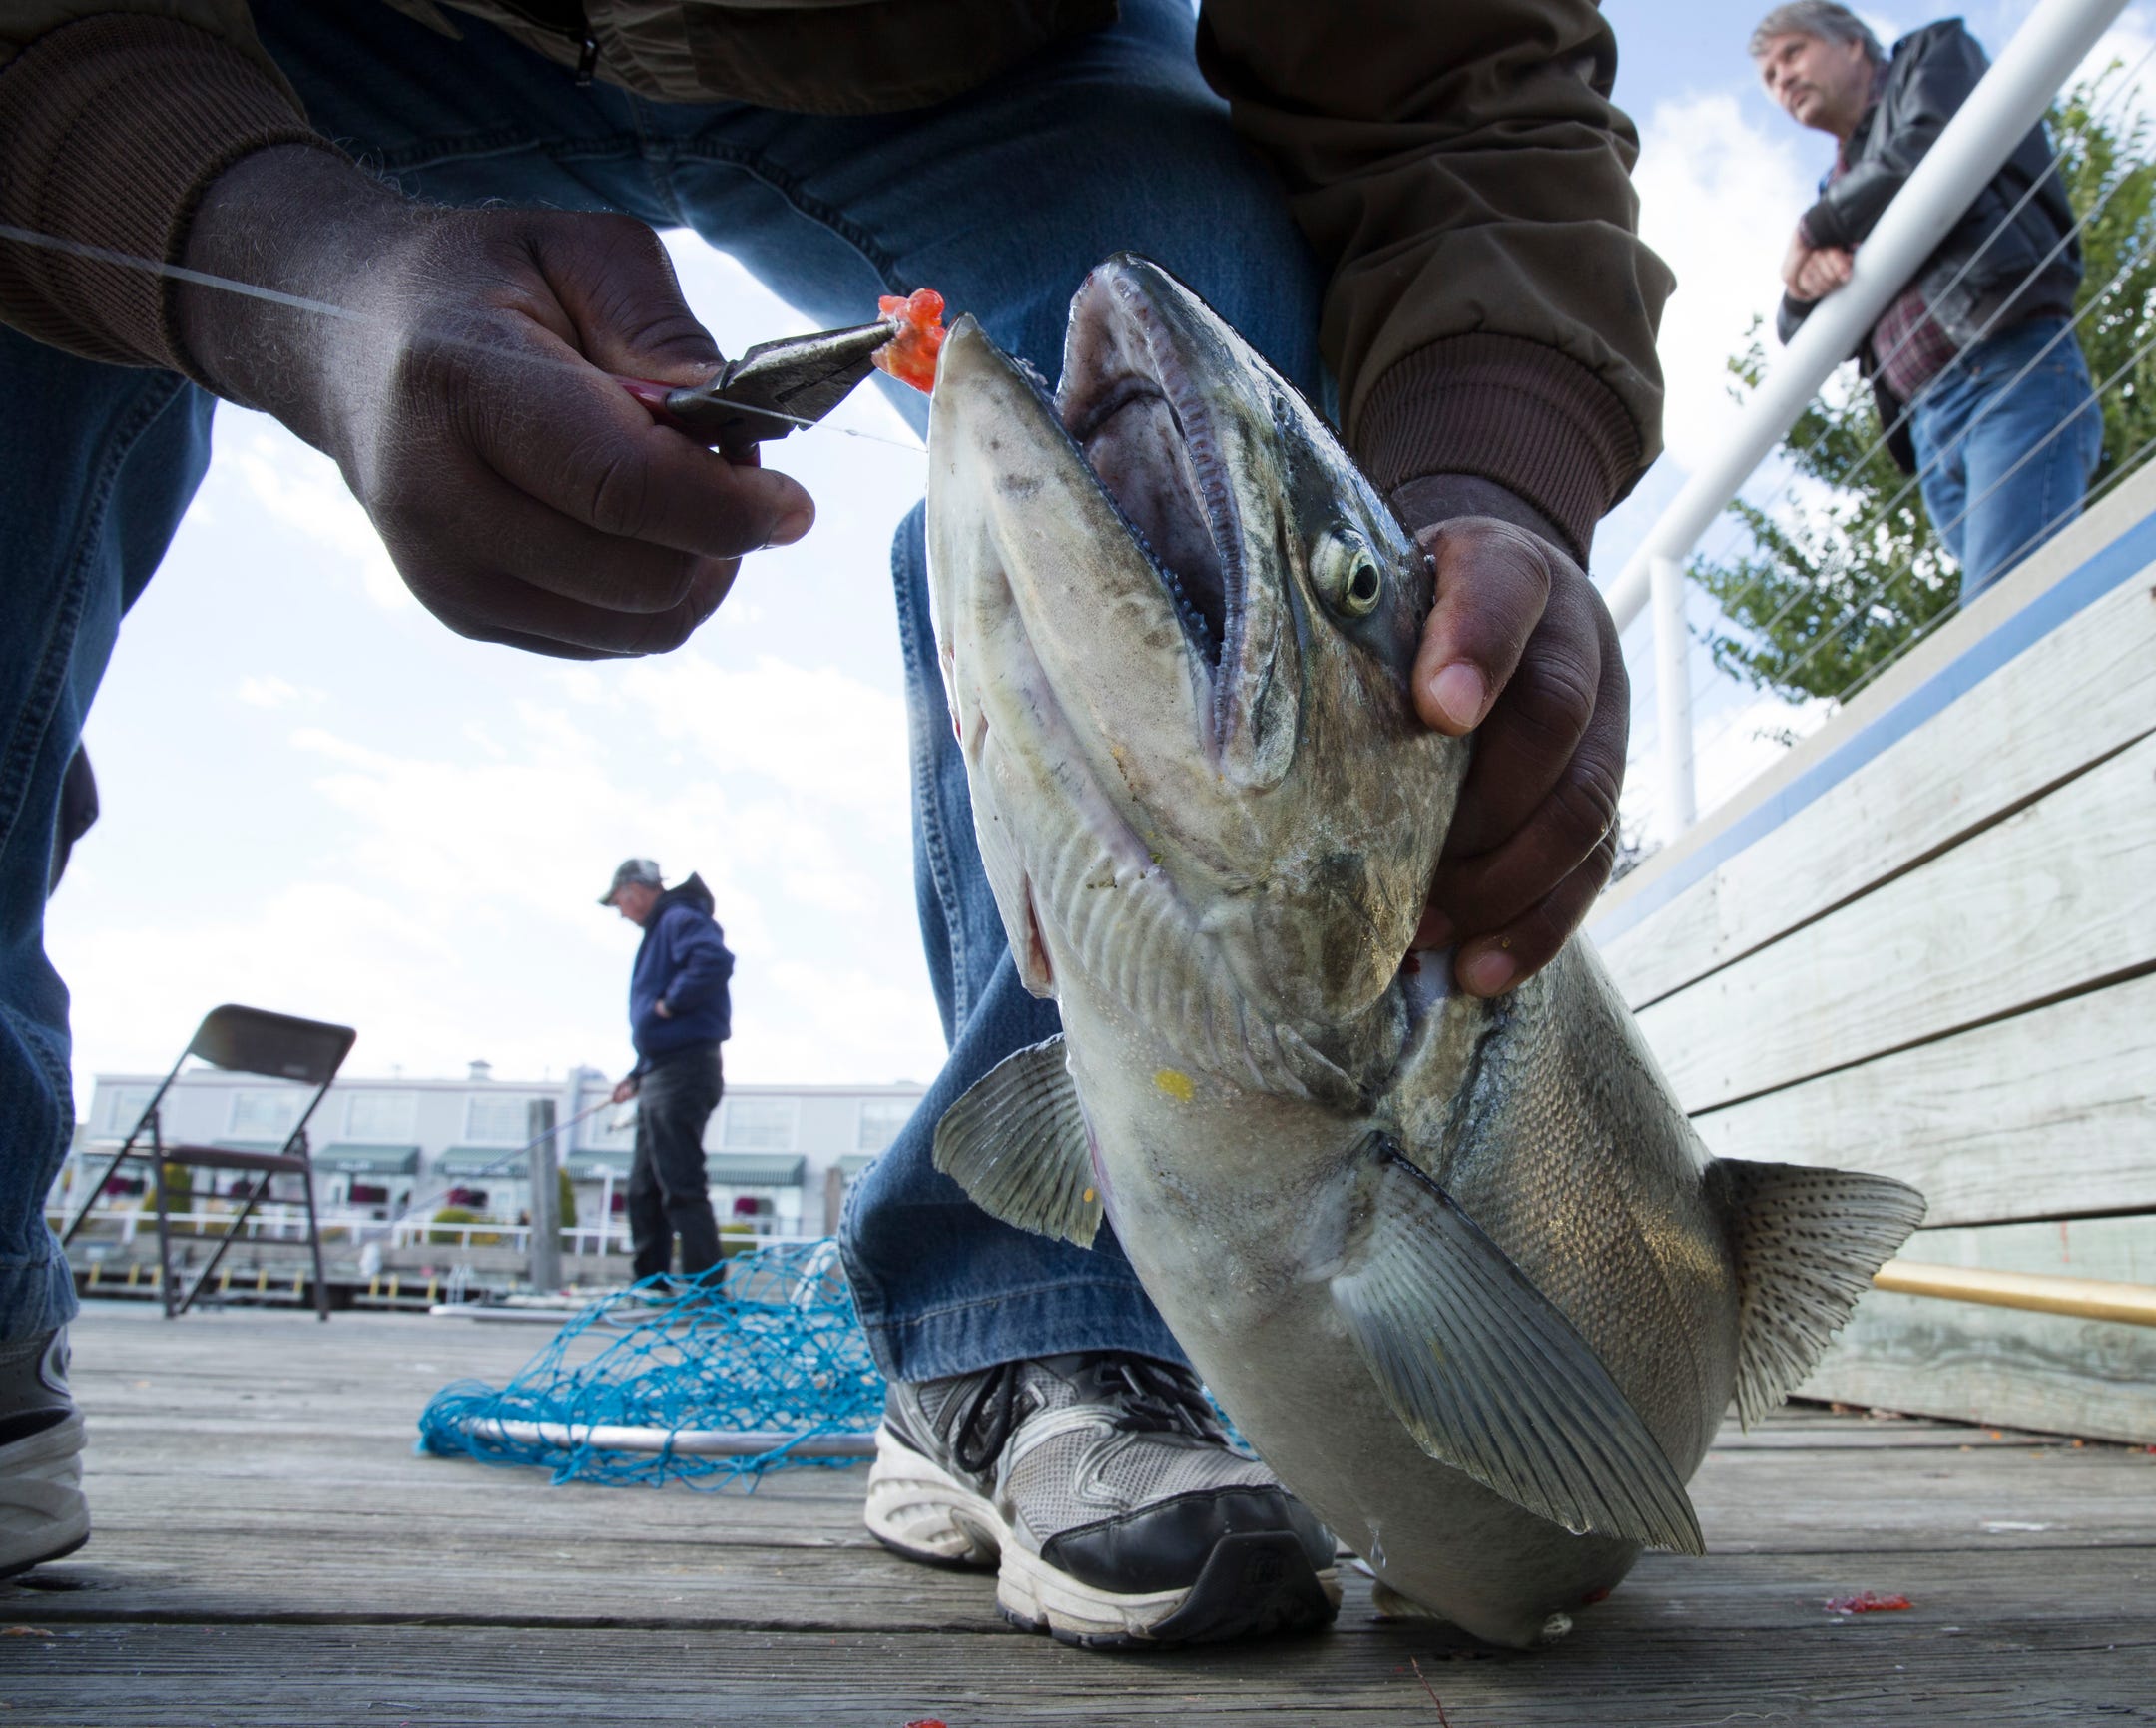 Fishing Program Gives Veterans a Day on the Ocean